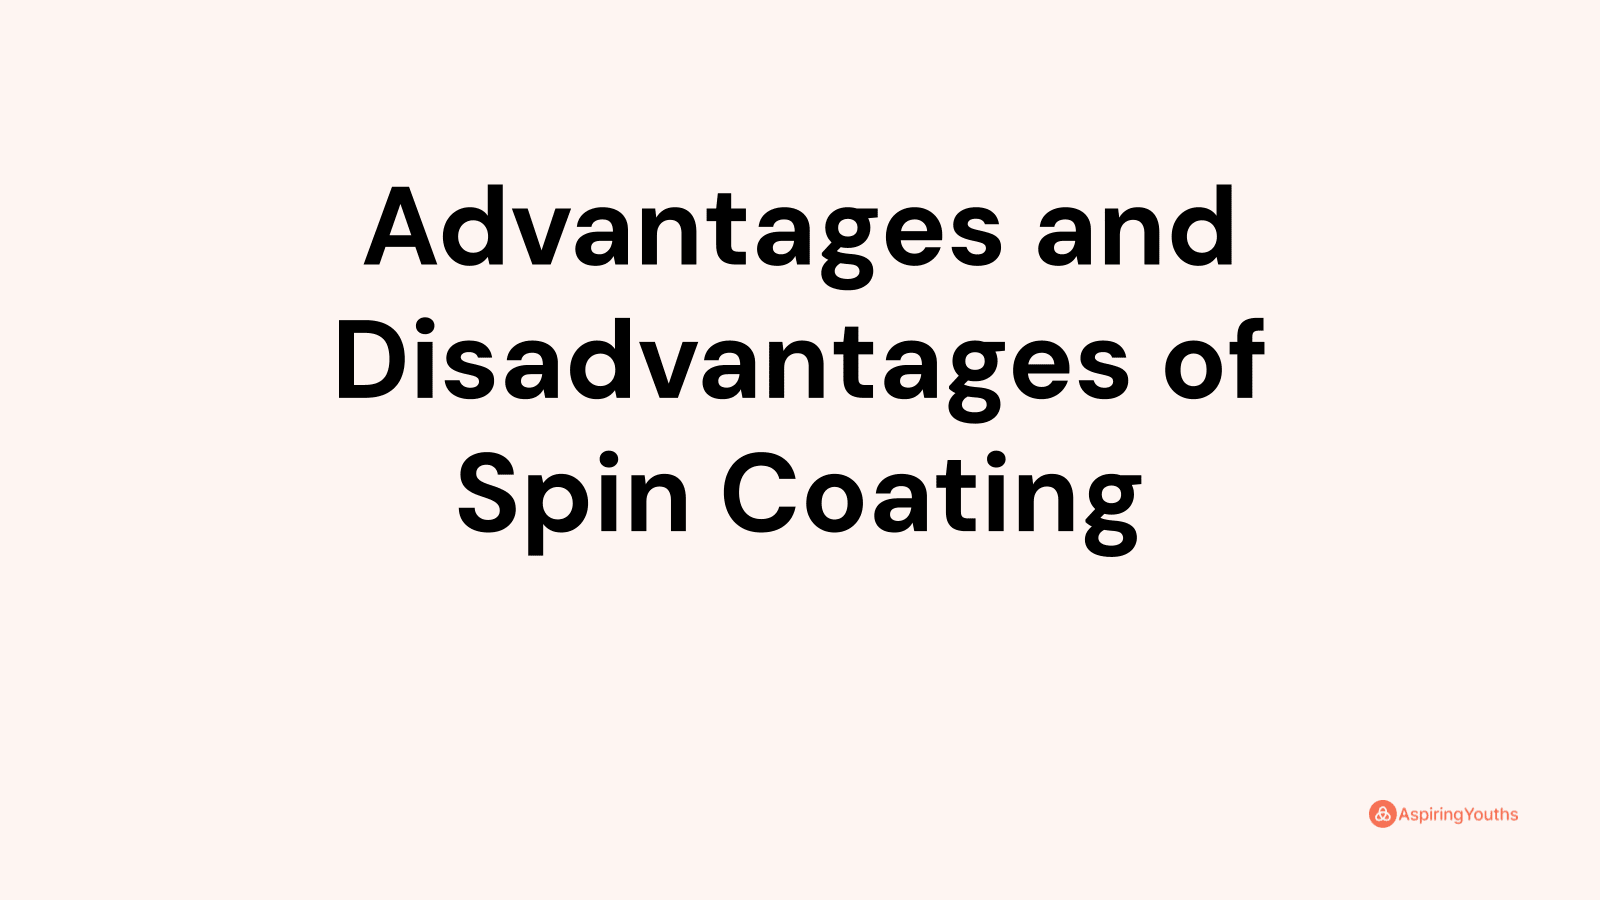 Advantages and disadvantages of Spin Coating